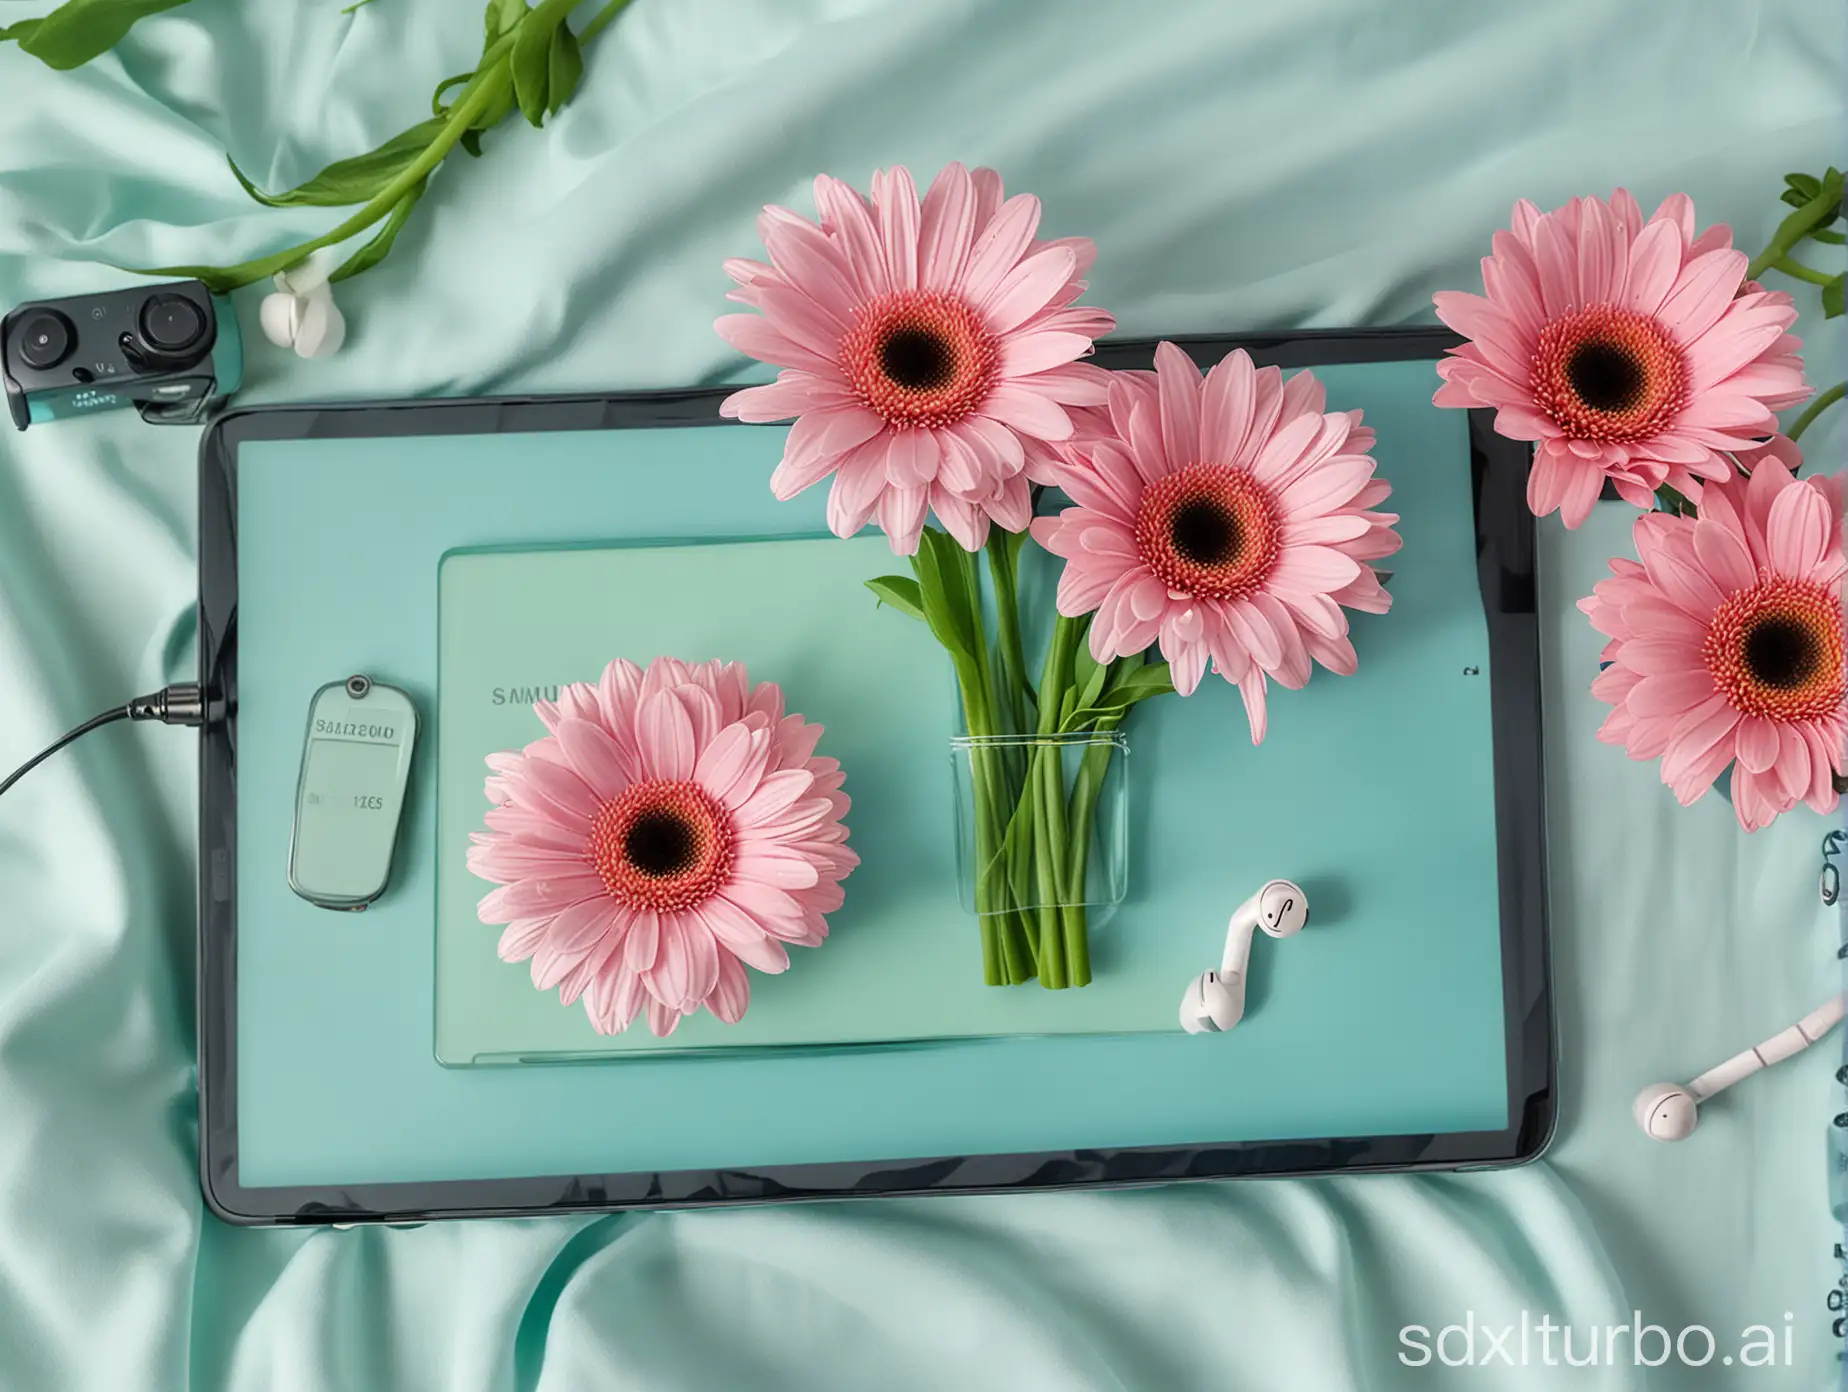 Woman-Texting-on-Samsung-Laptop-and-Phone-with-Earbuds-Amidst-Gerberas